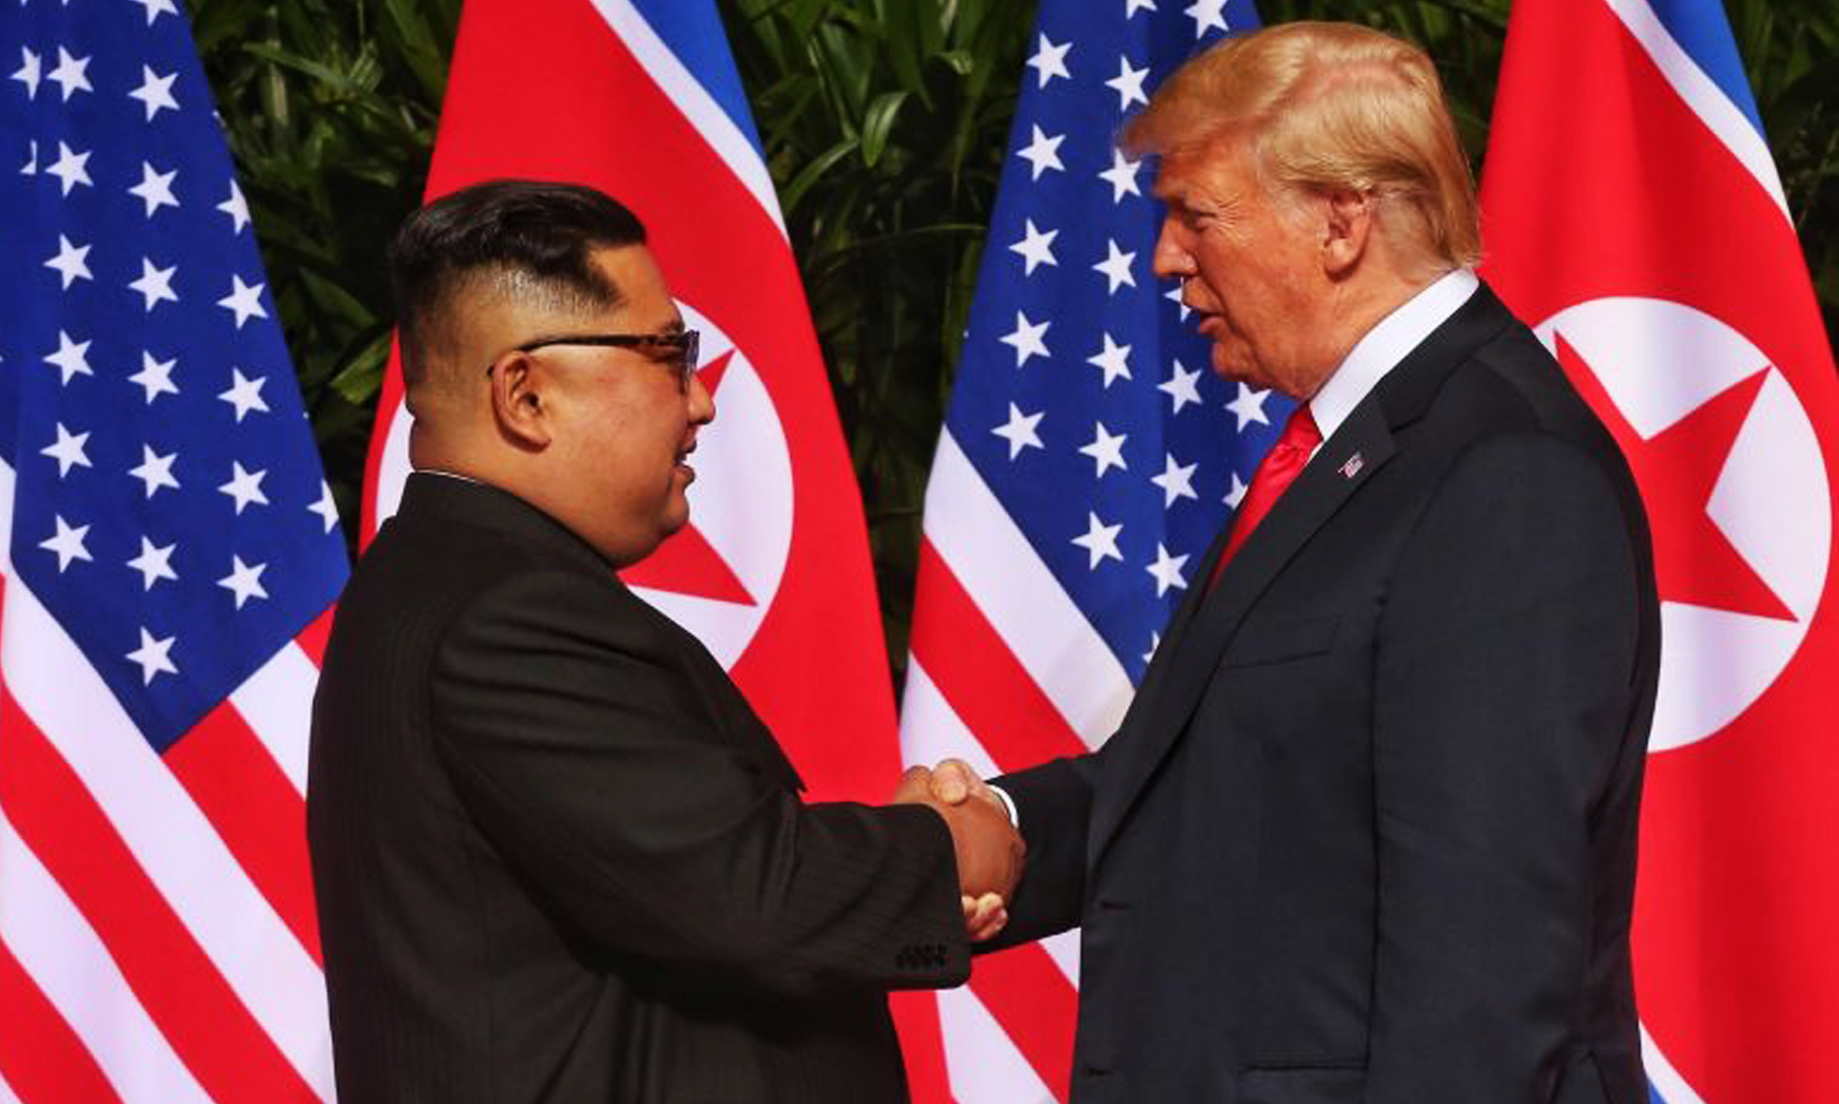 Trump and Kim to have one-on-one meeting at Vietnam summit